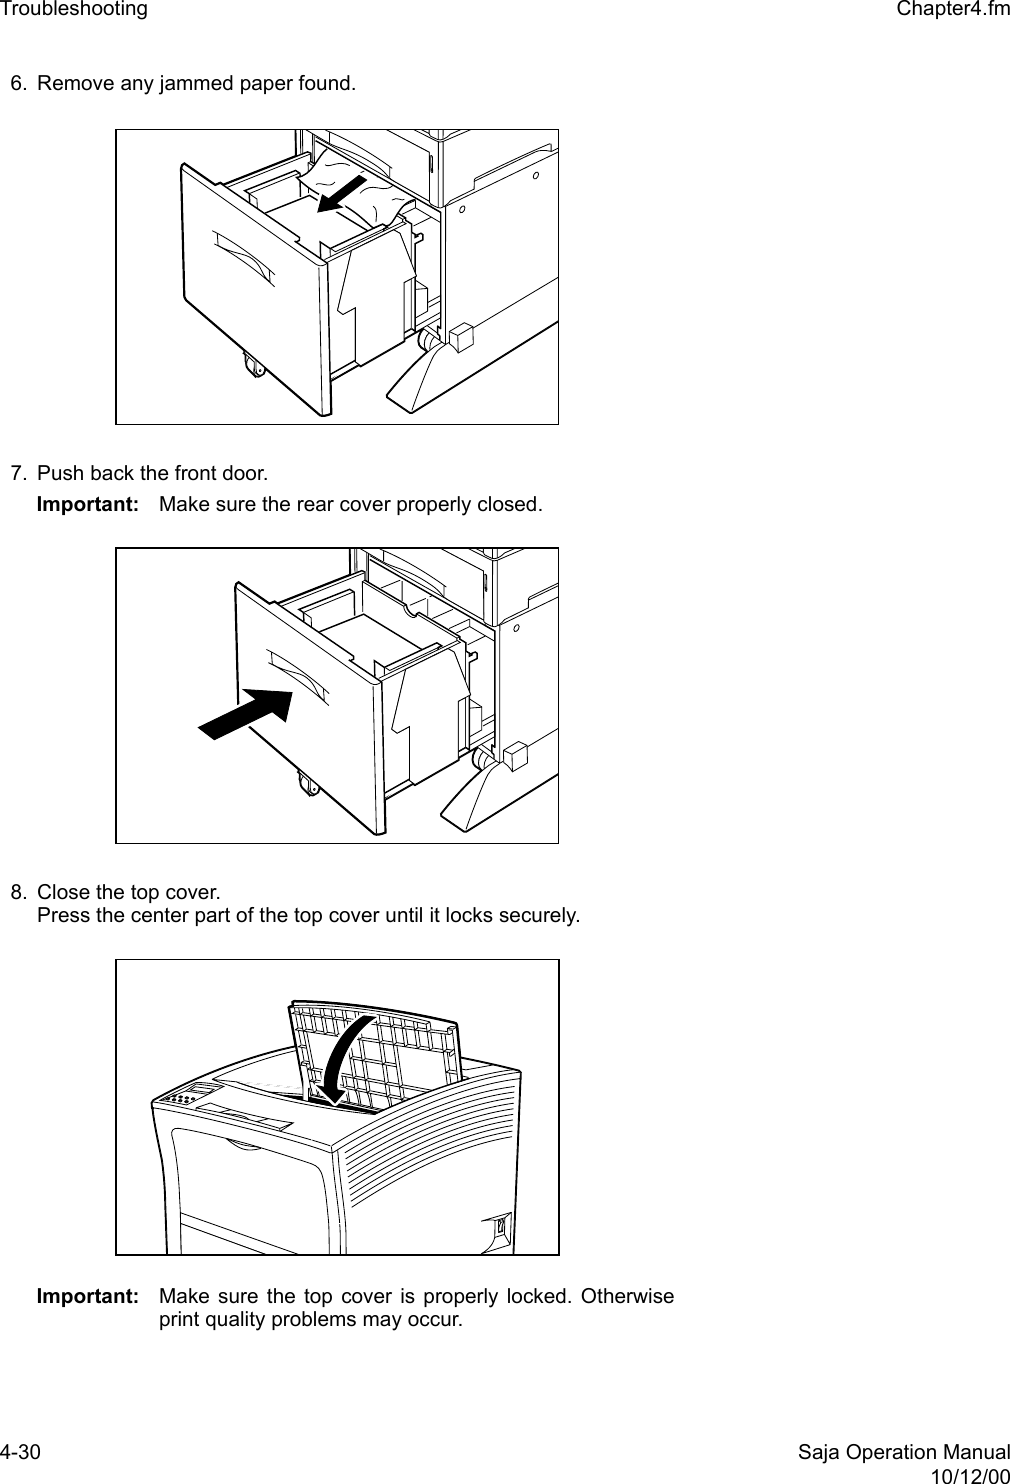 4-30 Saja Operation Manual10/12/00Troubleshooting  Chapter4.fm6. Remove any jammed paper found.7. Push back the front door.Important: Make sure the rear cover properly closed.8. Close the top cover.Press the center part of the top cover until it locks securely.Important: Make sure the top cover is properly locked. Otherwiseprint quality problems may occur. 